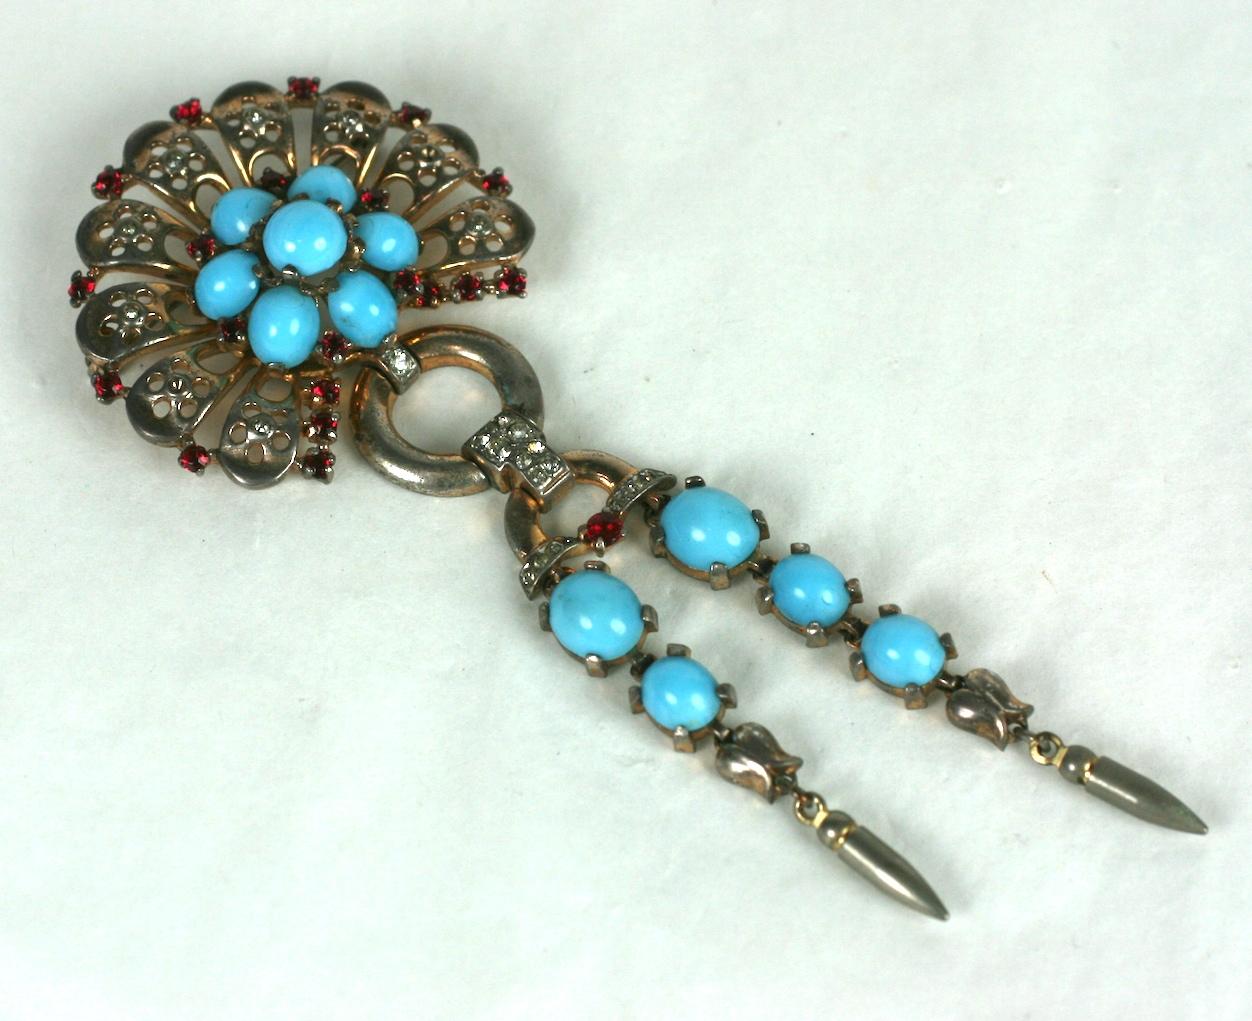 Trifari Retro Sterling Turquoise Dangle Brooch from the 1940's. Retro pierced design with faux cab turquoises and ruby pastes by Alfred Phillipe. Vermeil pink gold finish. 
4.25